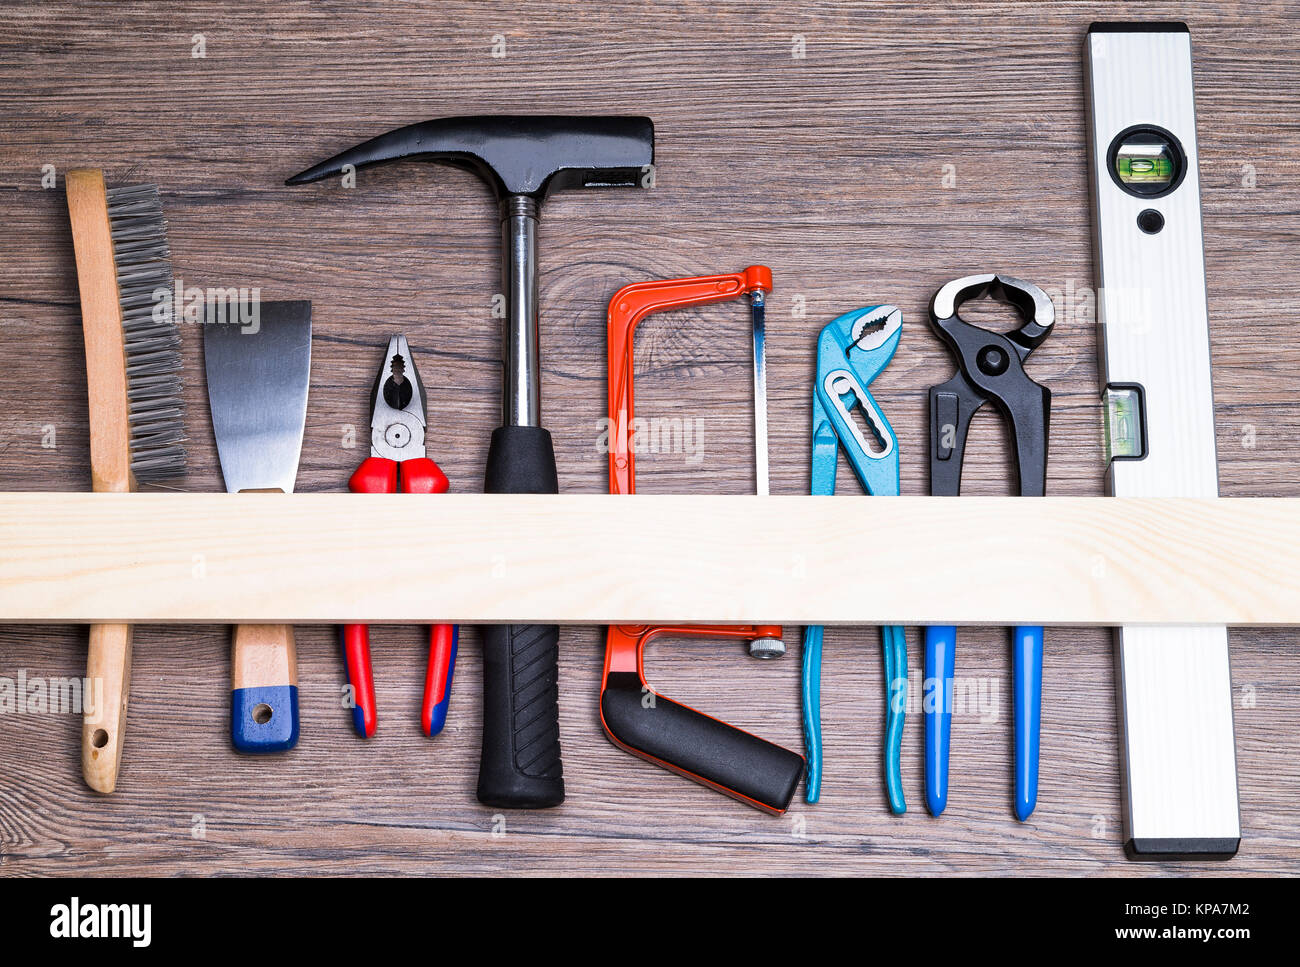 tools on wooden table Stock Photo